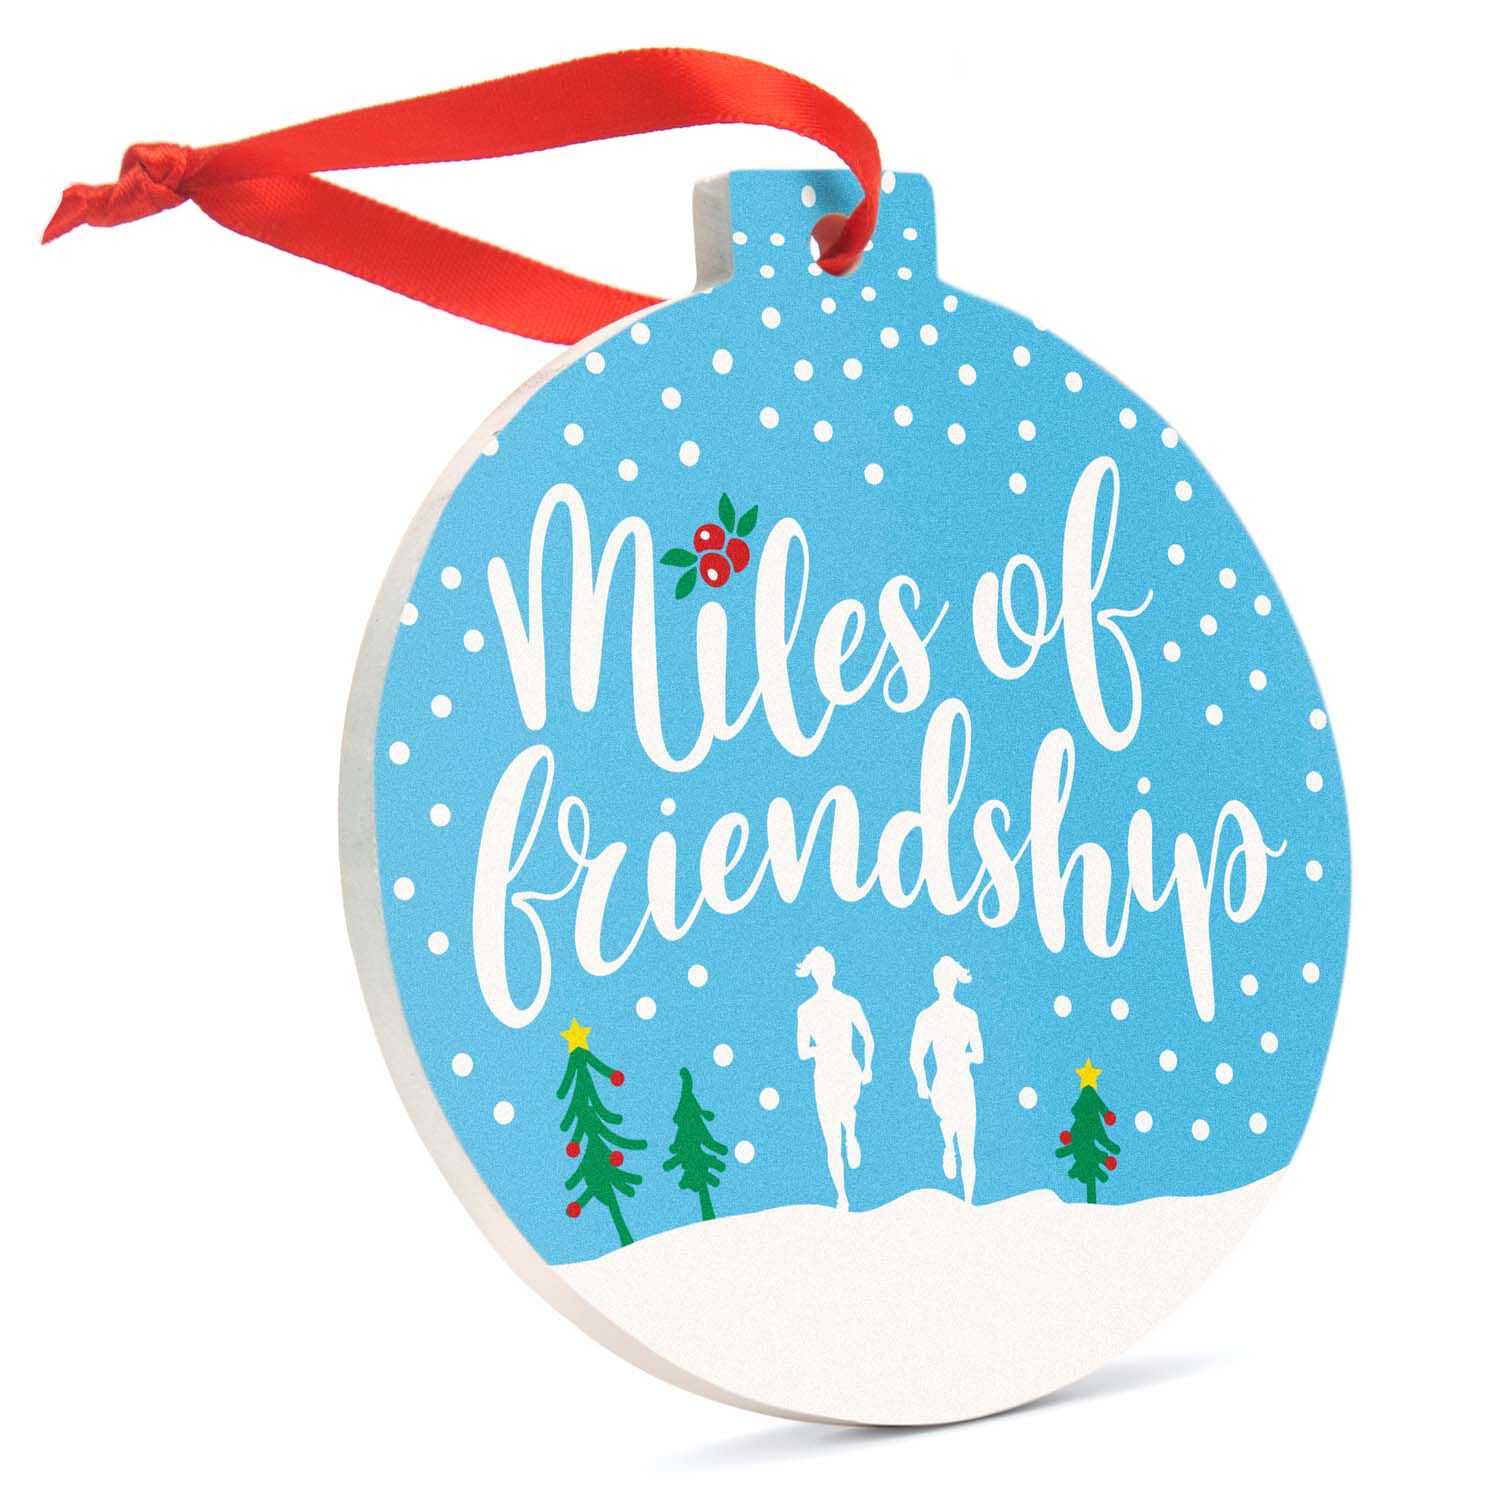 Details about   LUV 2 RUN Runner Christmas Ornament 